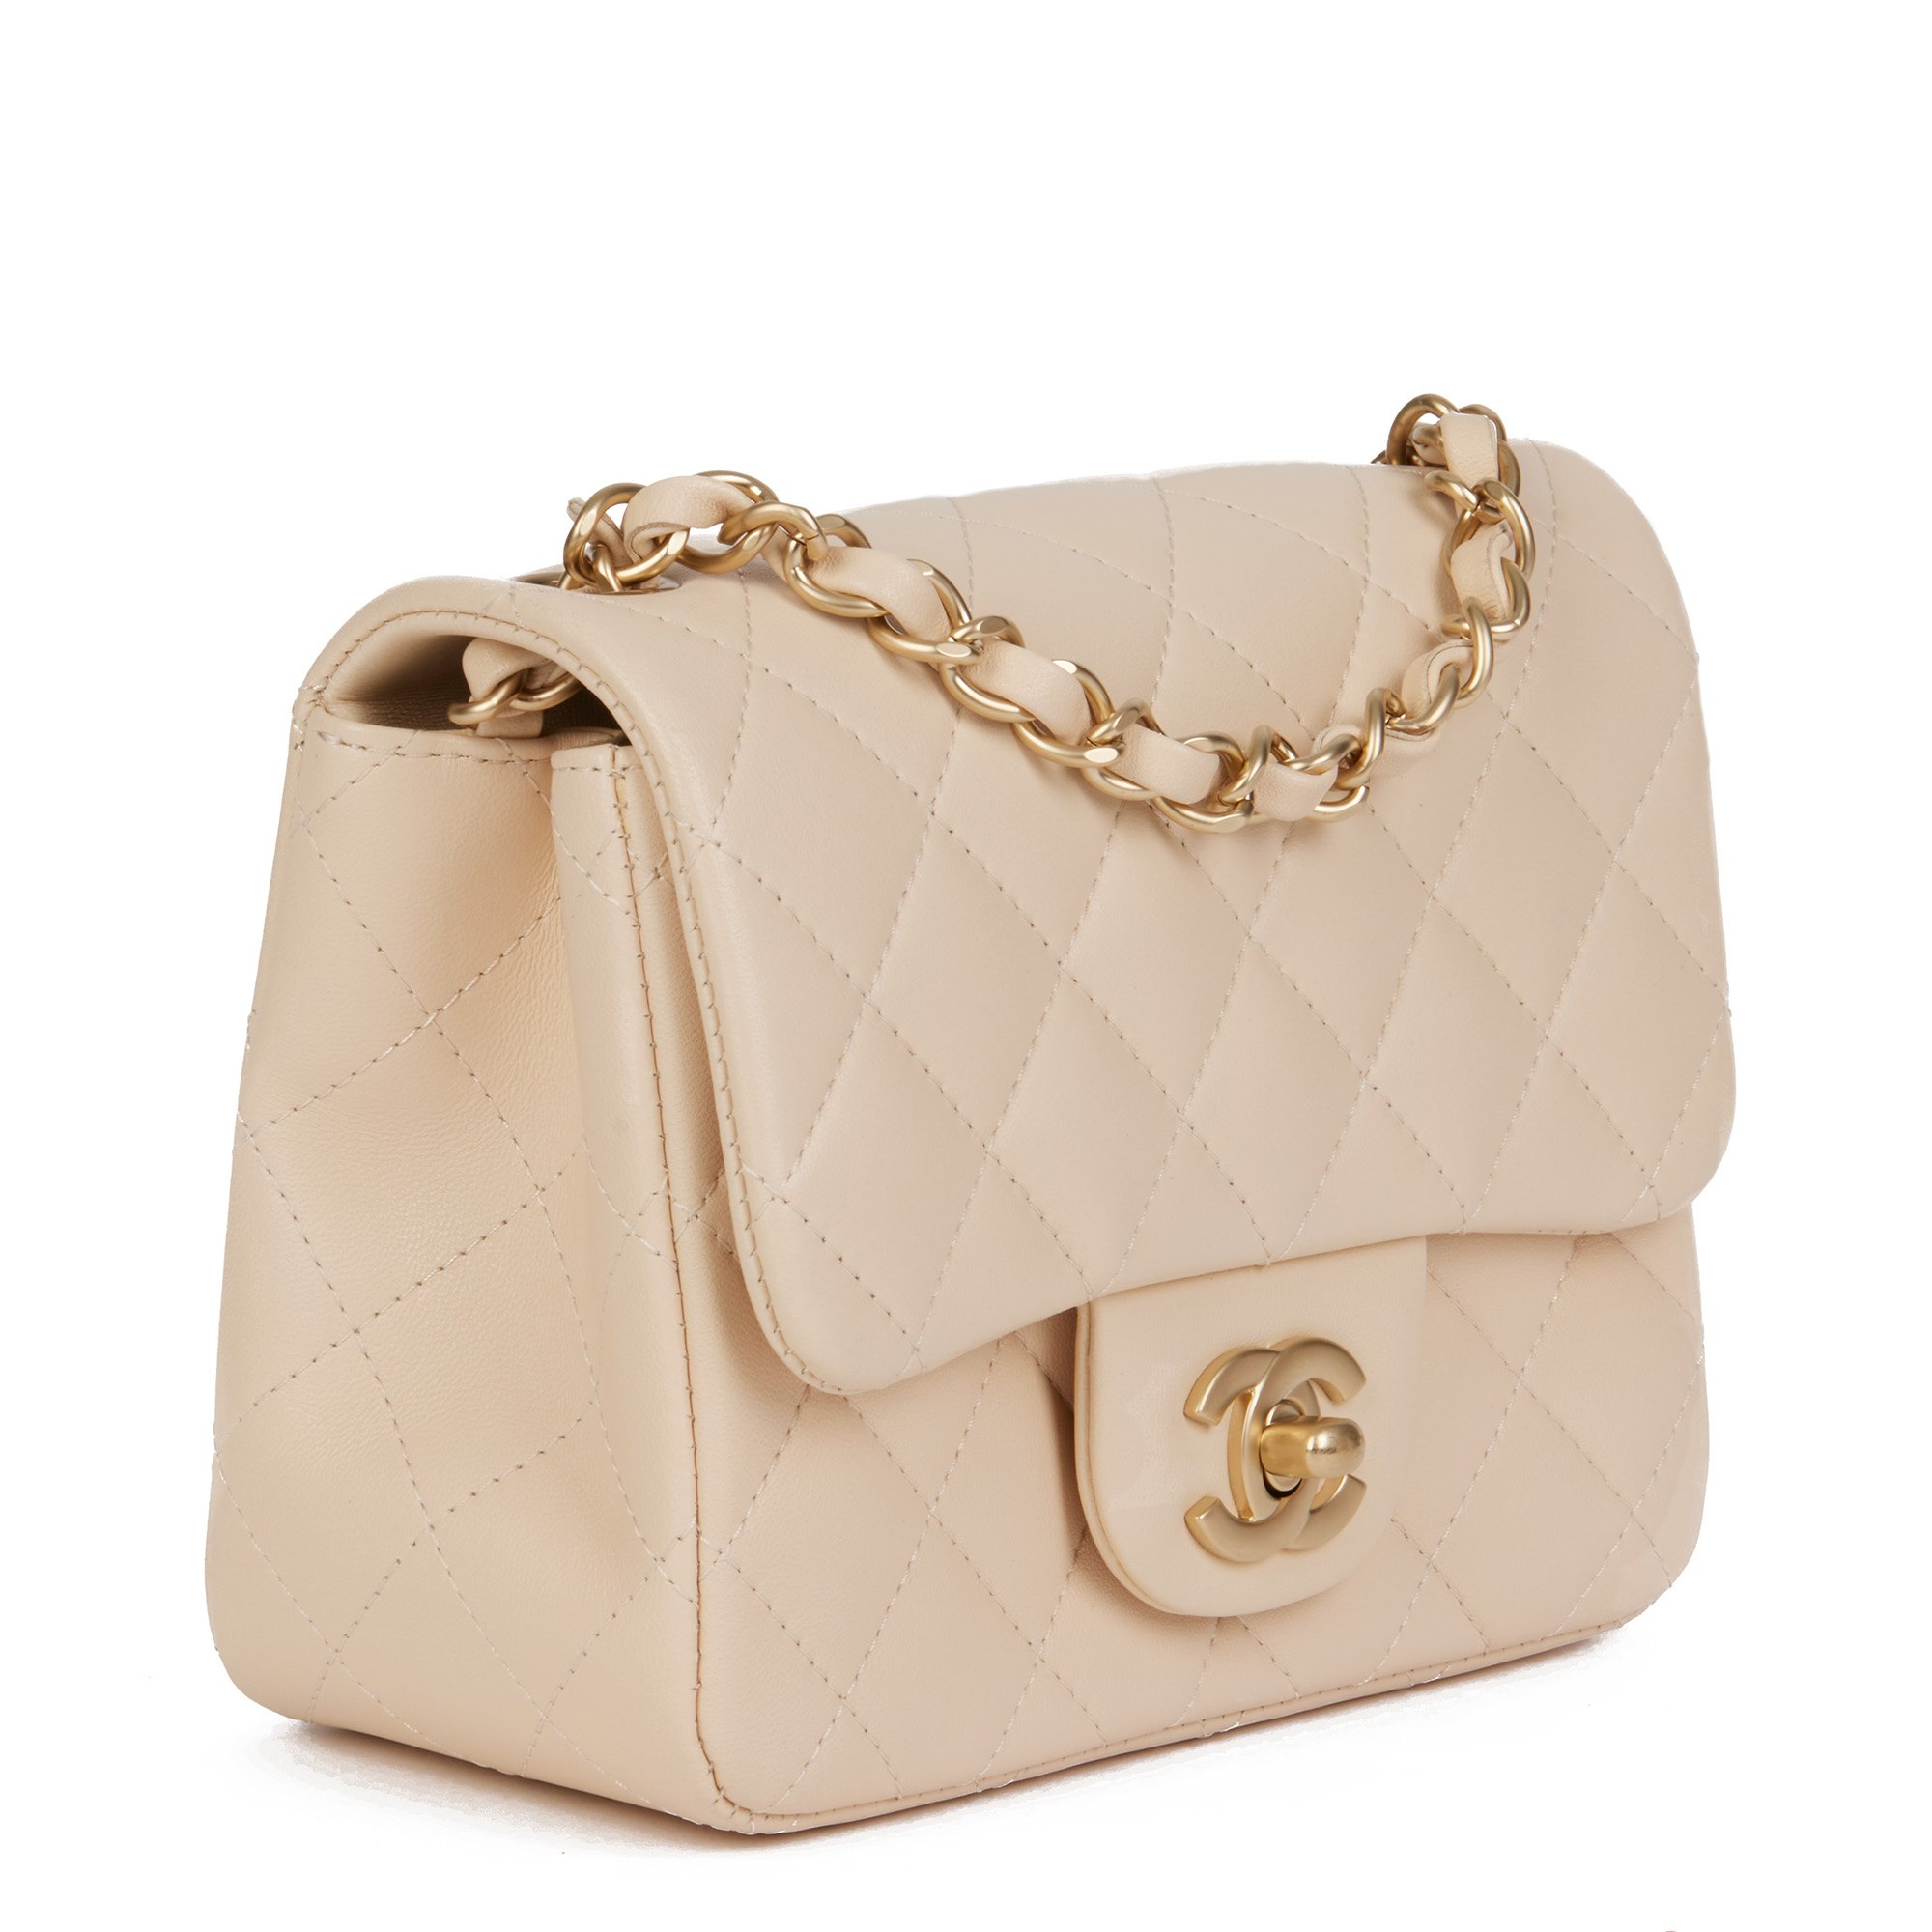 Chanel Light Beige Quilted Lambskin Mini Flap Bag